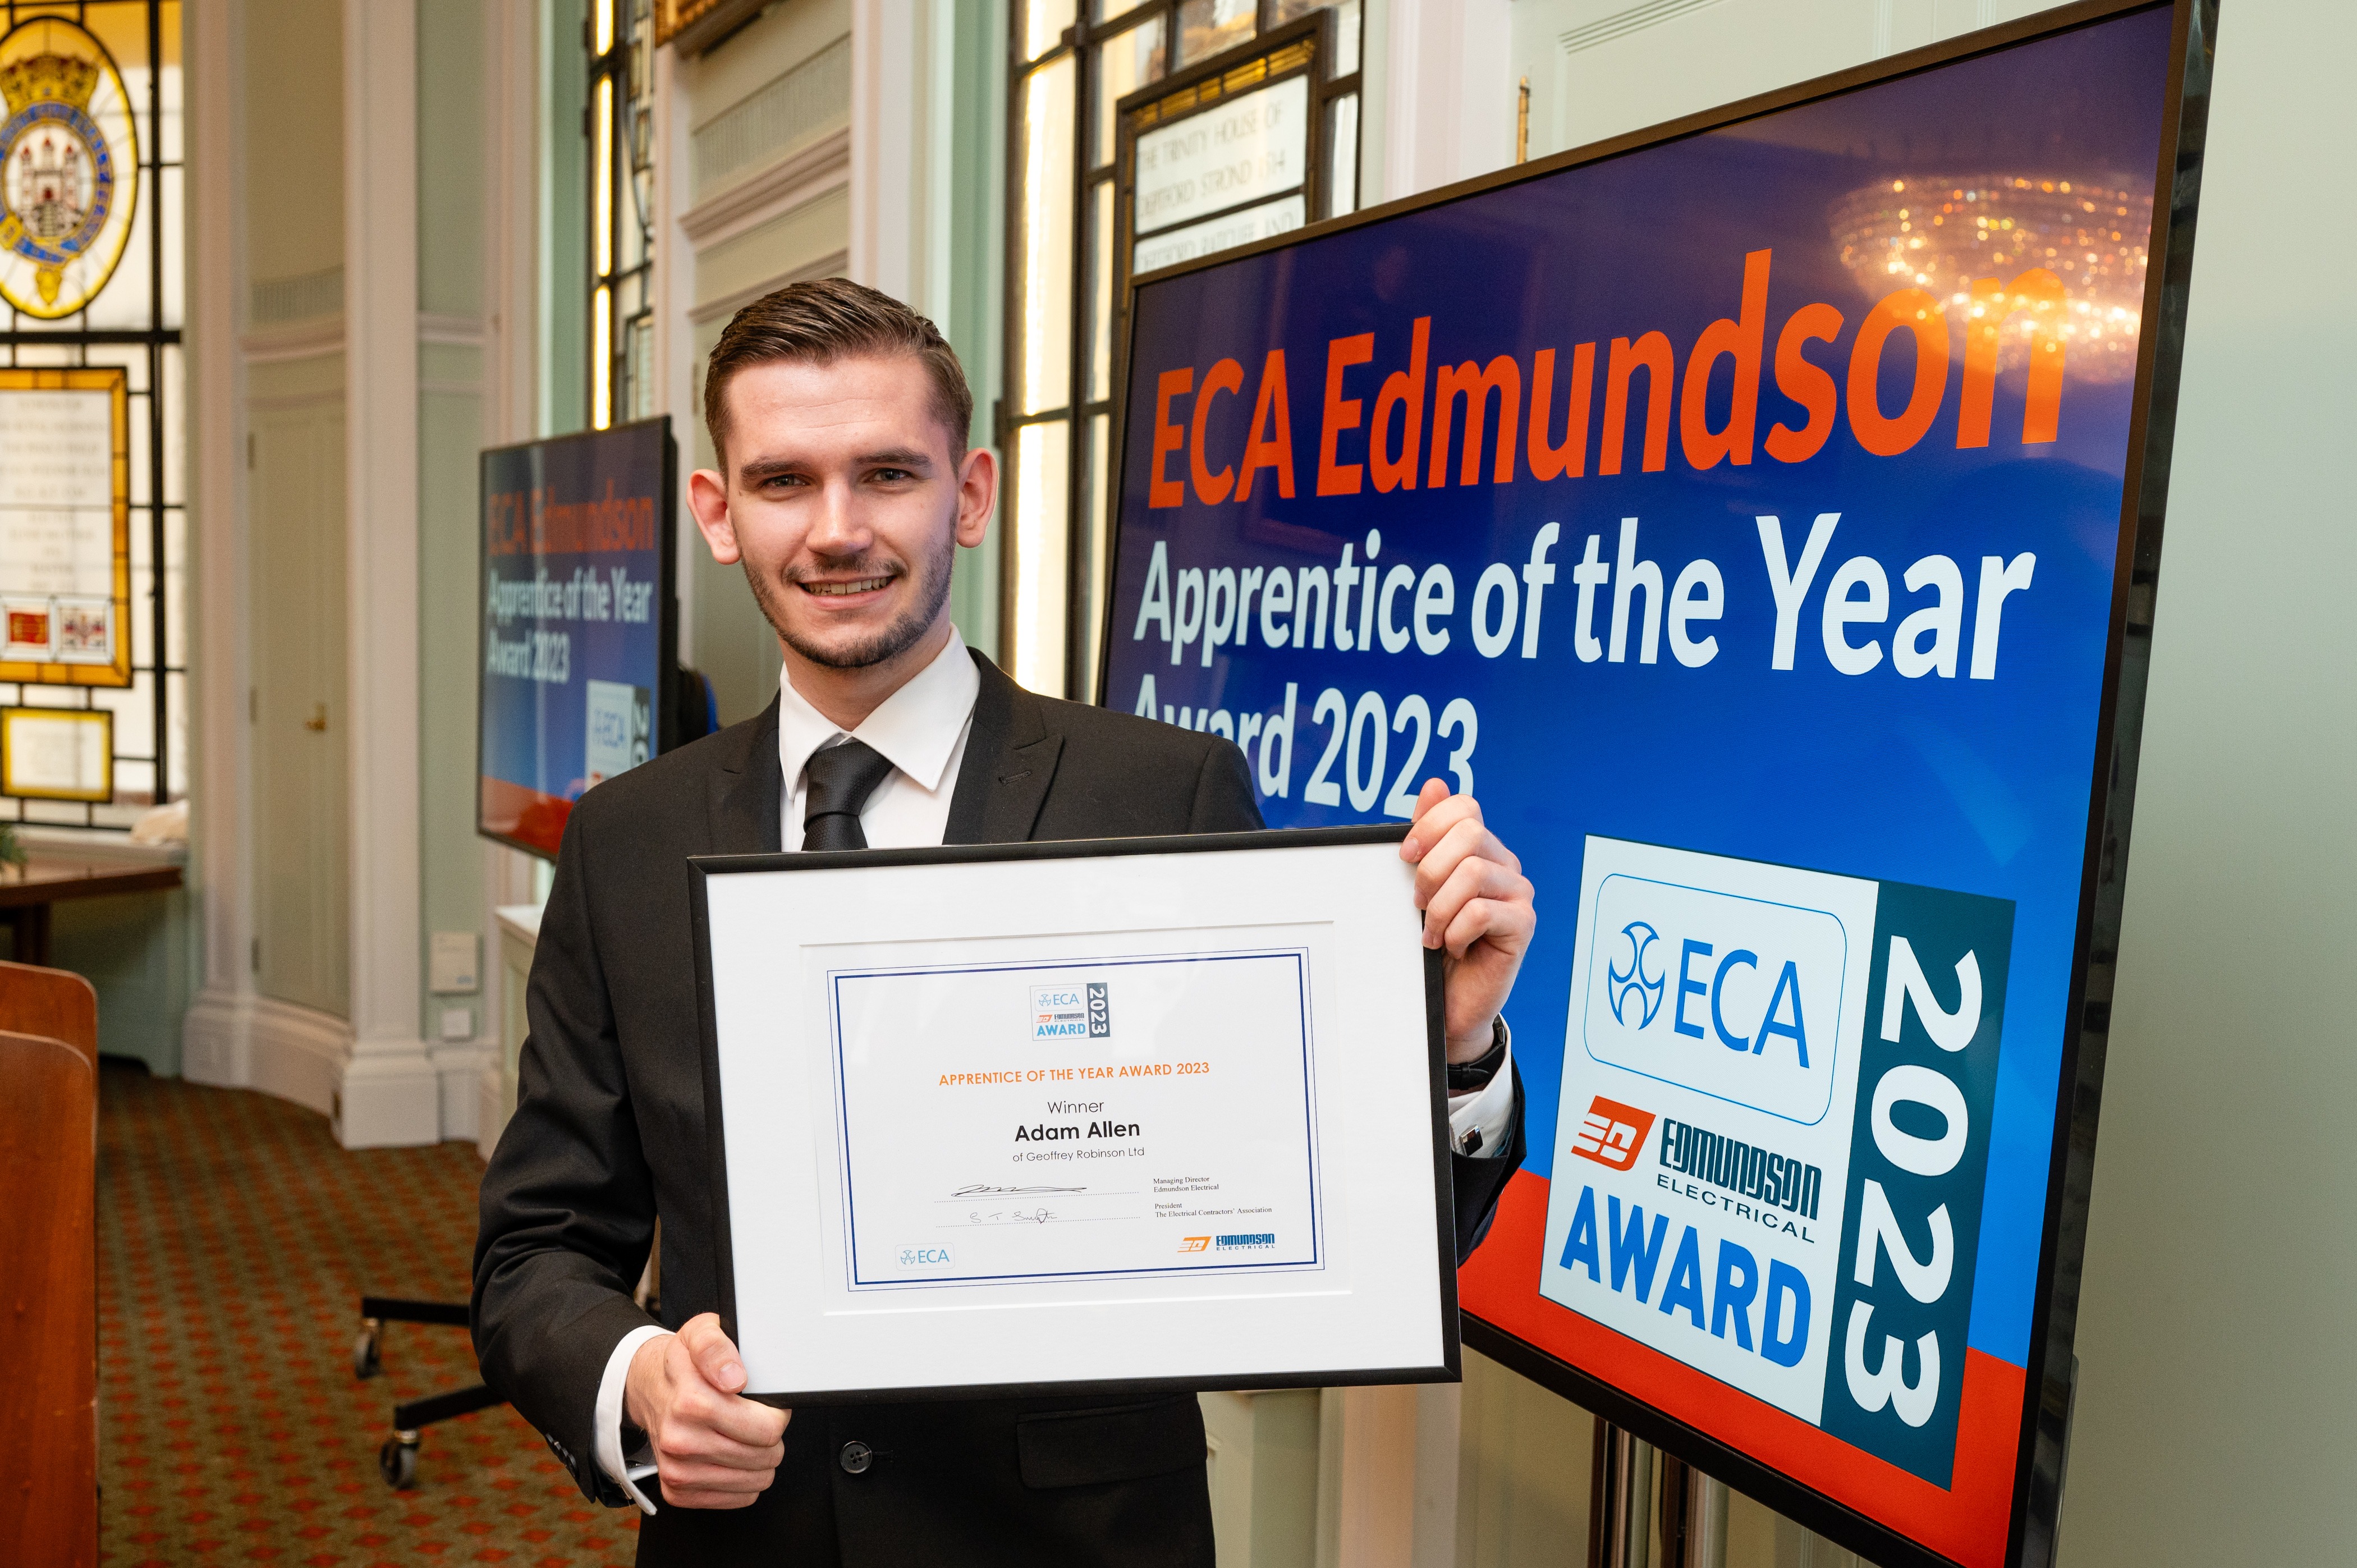 Insights from the ECA Edmundson Apprentice of the Year